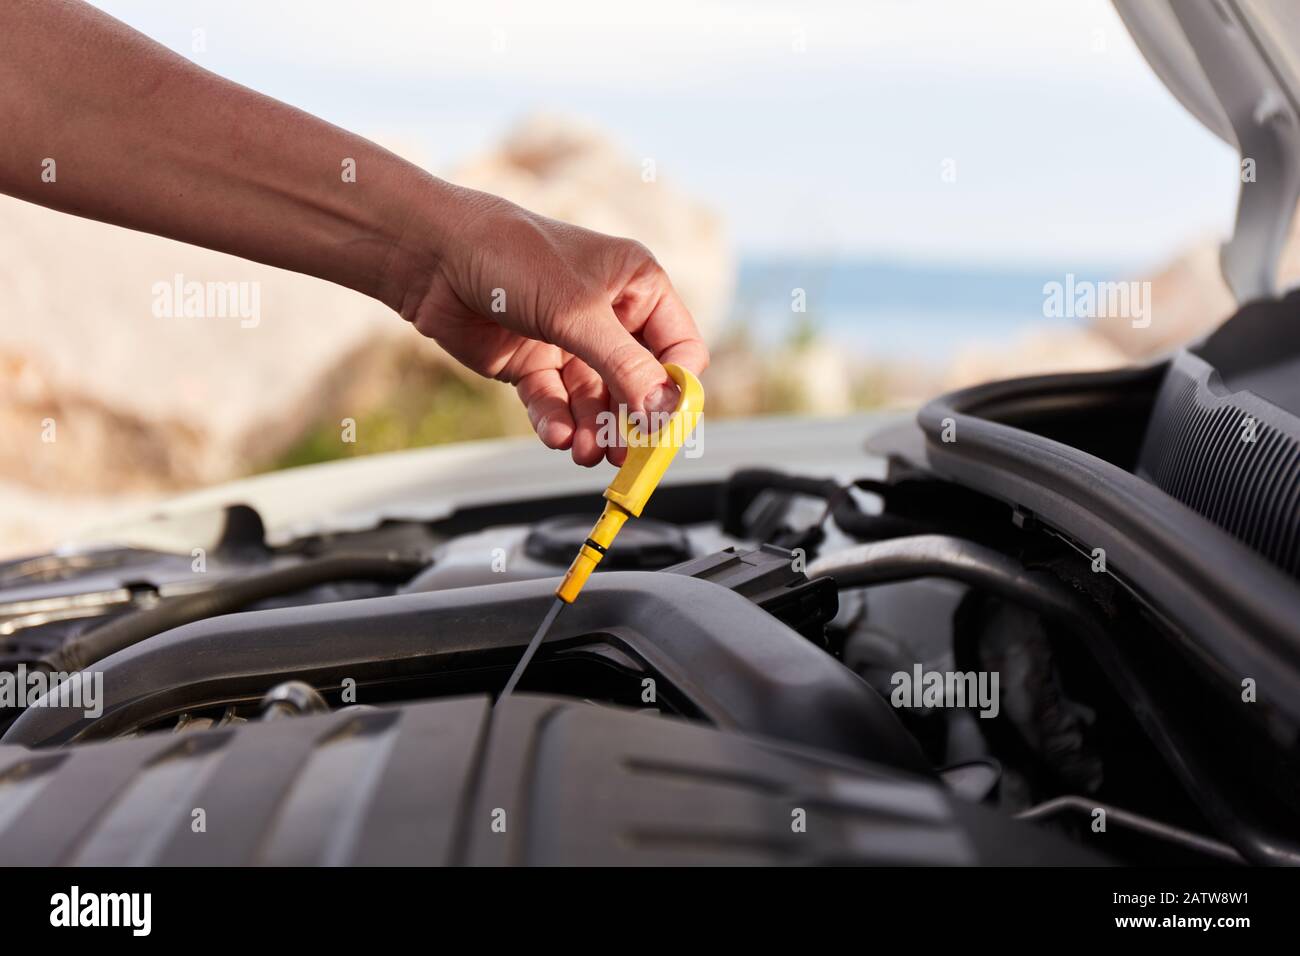 Checking engine oil. A woman's hand holding an oil bayonet in a modern popular car during a holiday trip. The sea is visible in the background. Stock Photo